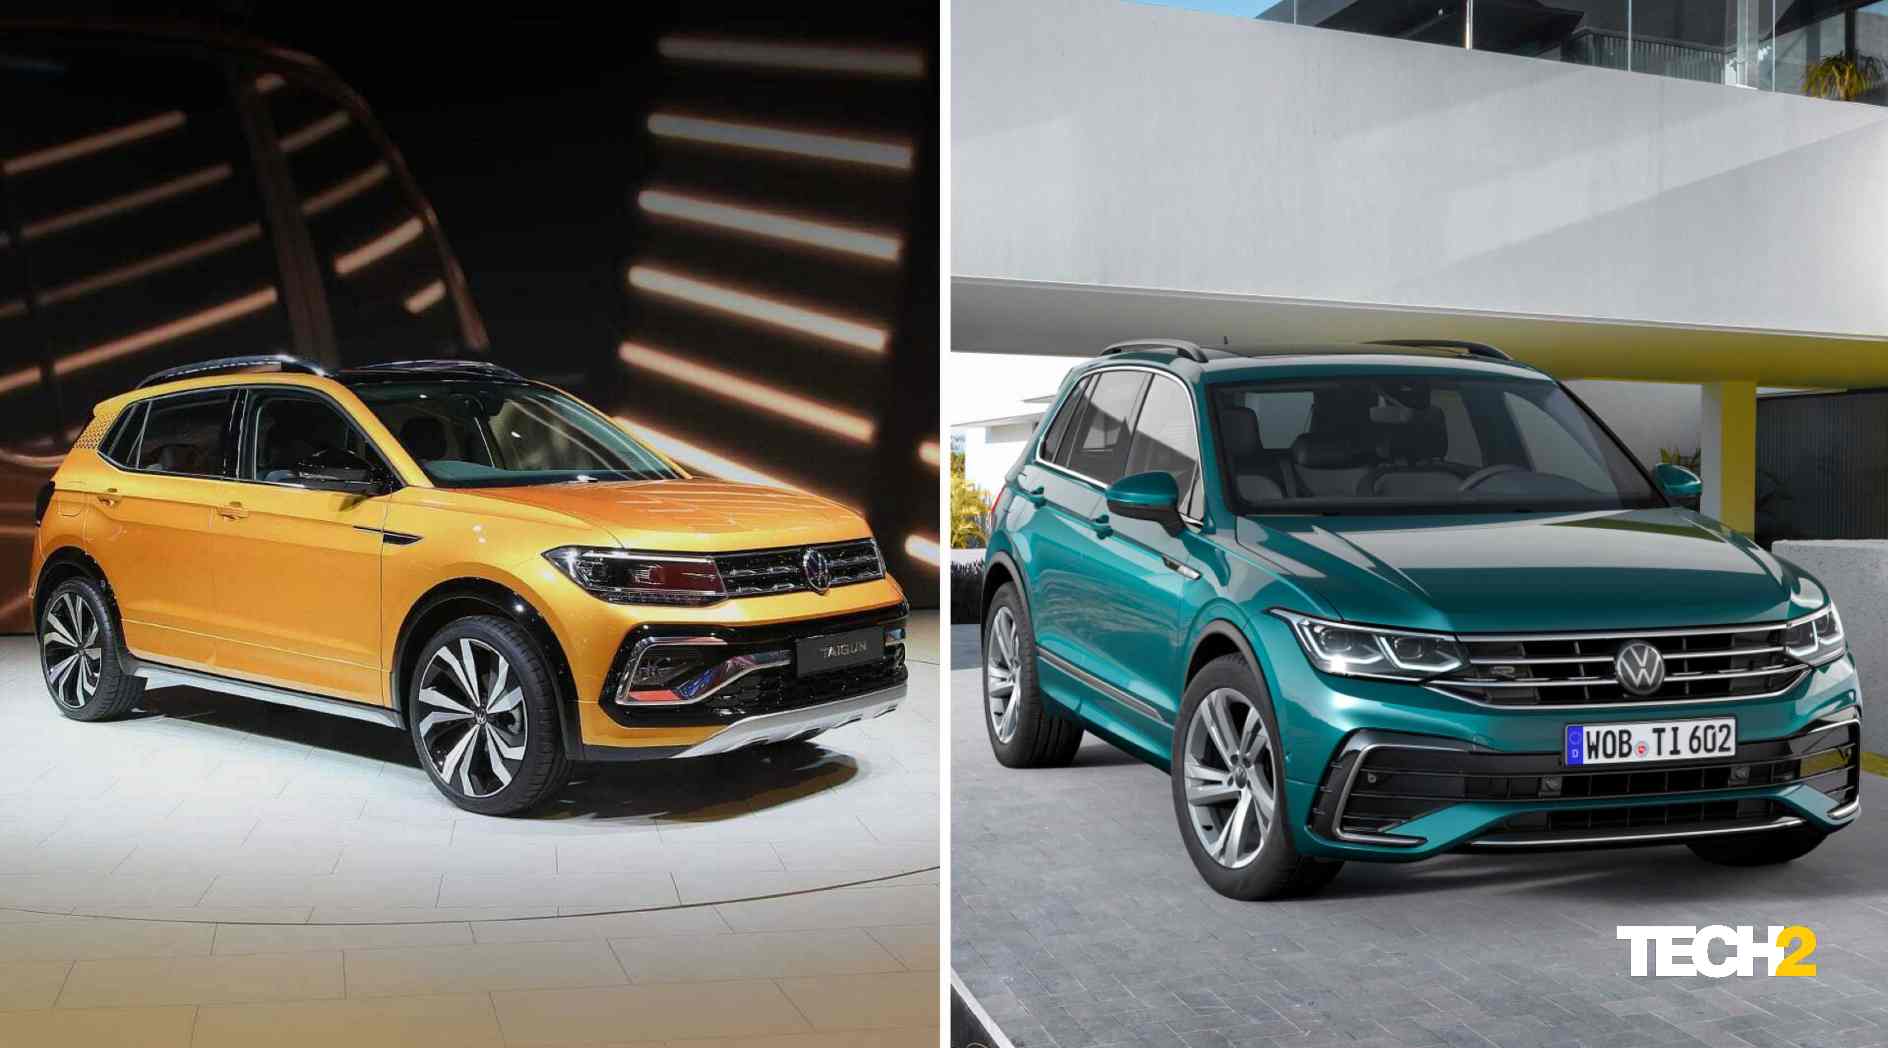  Volkswagen Taigun launch timeframe confirmed, Tiguan facelift to launch by mid-2021